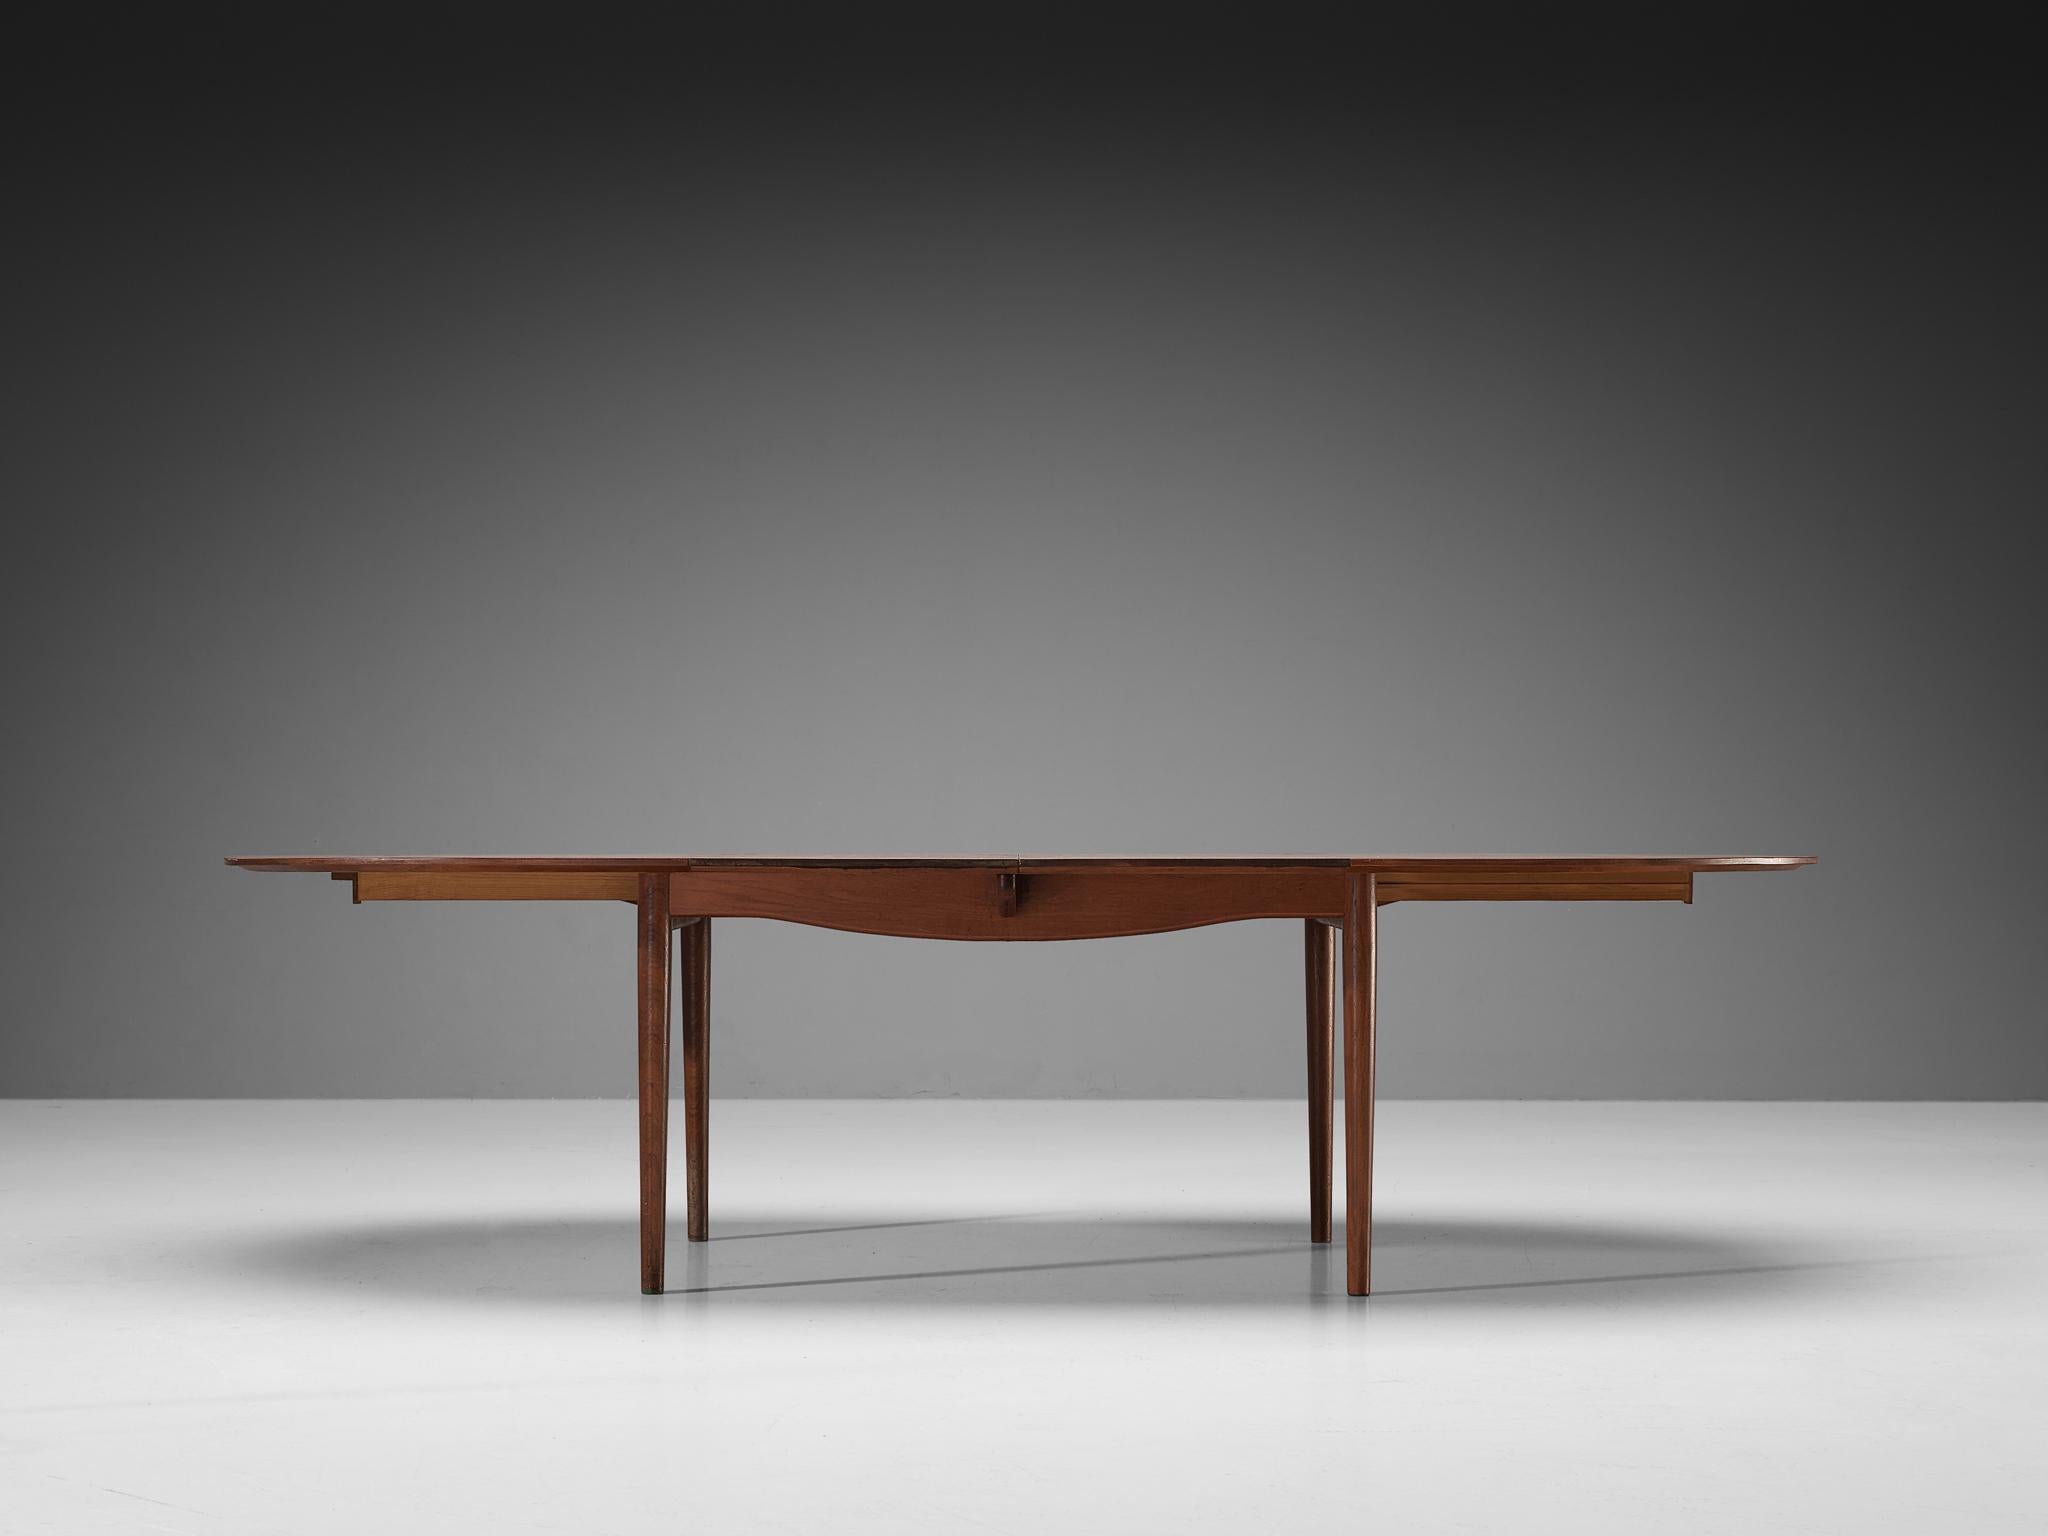 Mid-20th Century Finn Juhl for Niels Vodder Dining Table ‘Judas’ in Teak and Silver Inlay